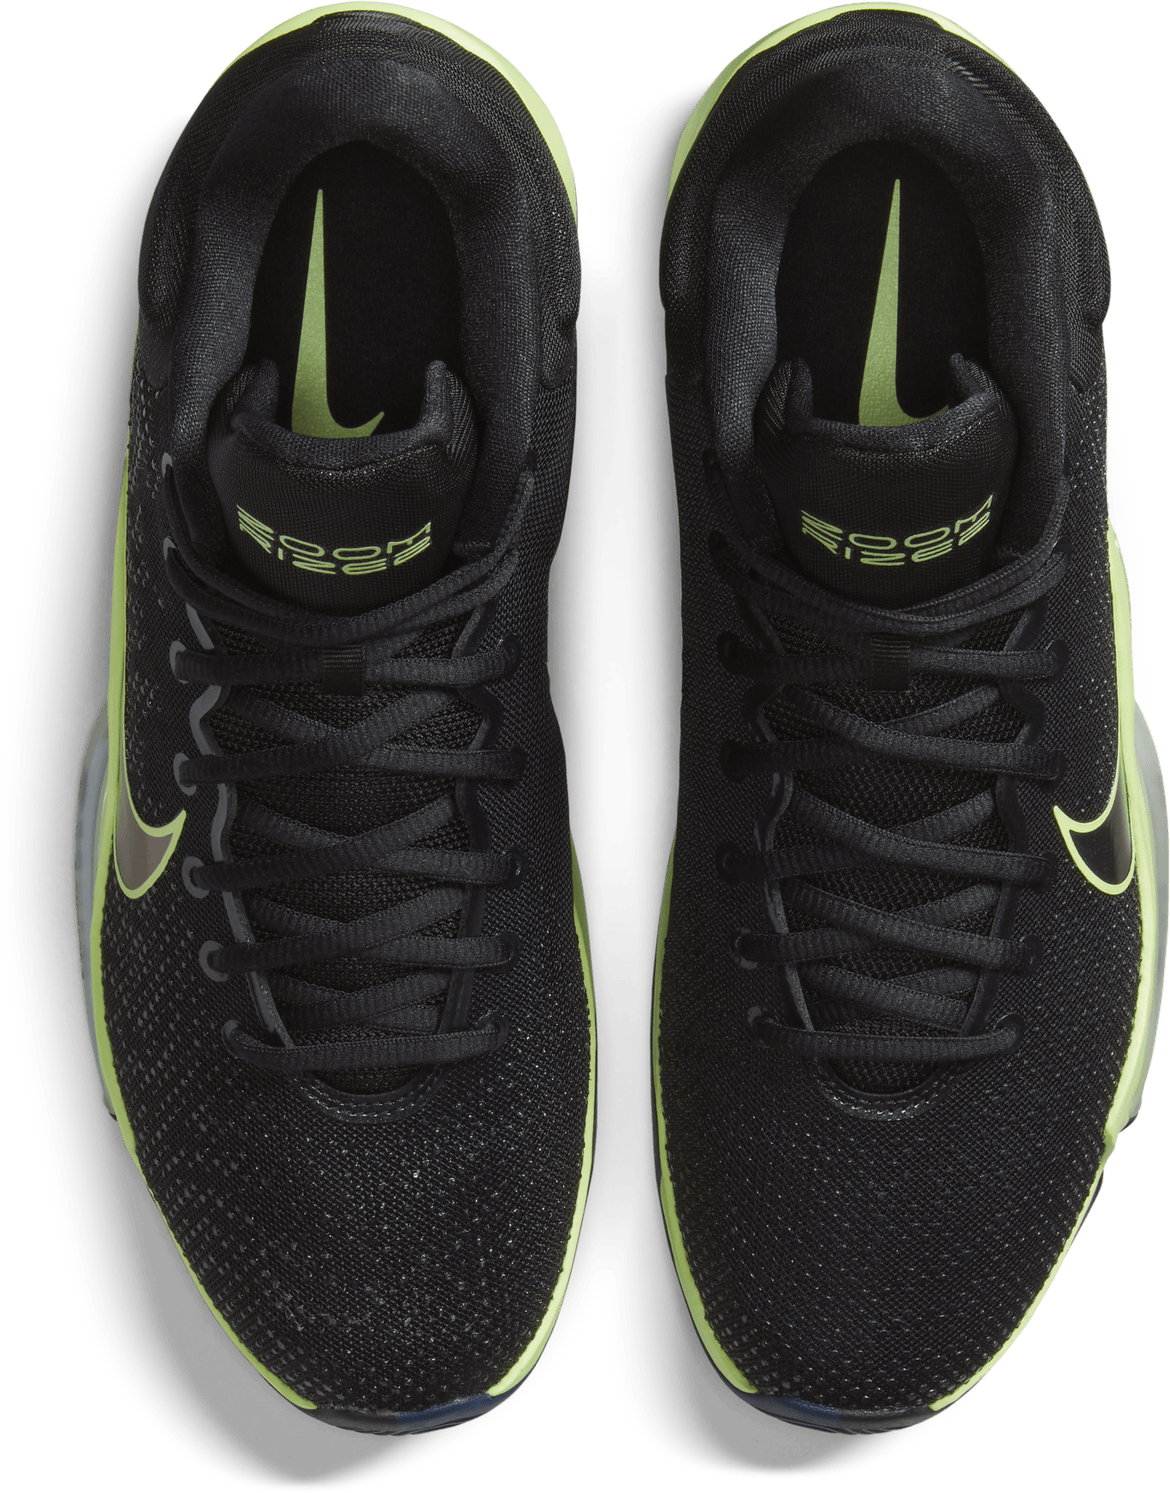 Nike Zoom Rize 2 - Review, Deals, Pics of 5 Colorways